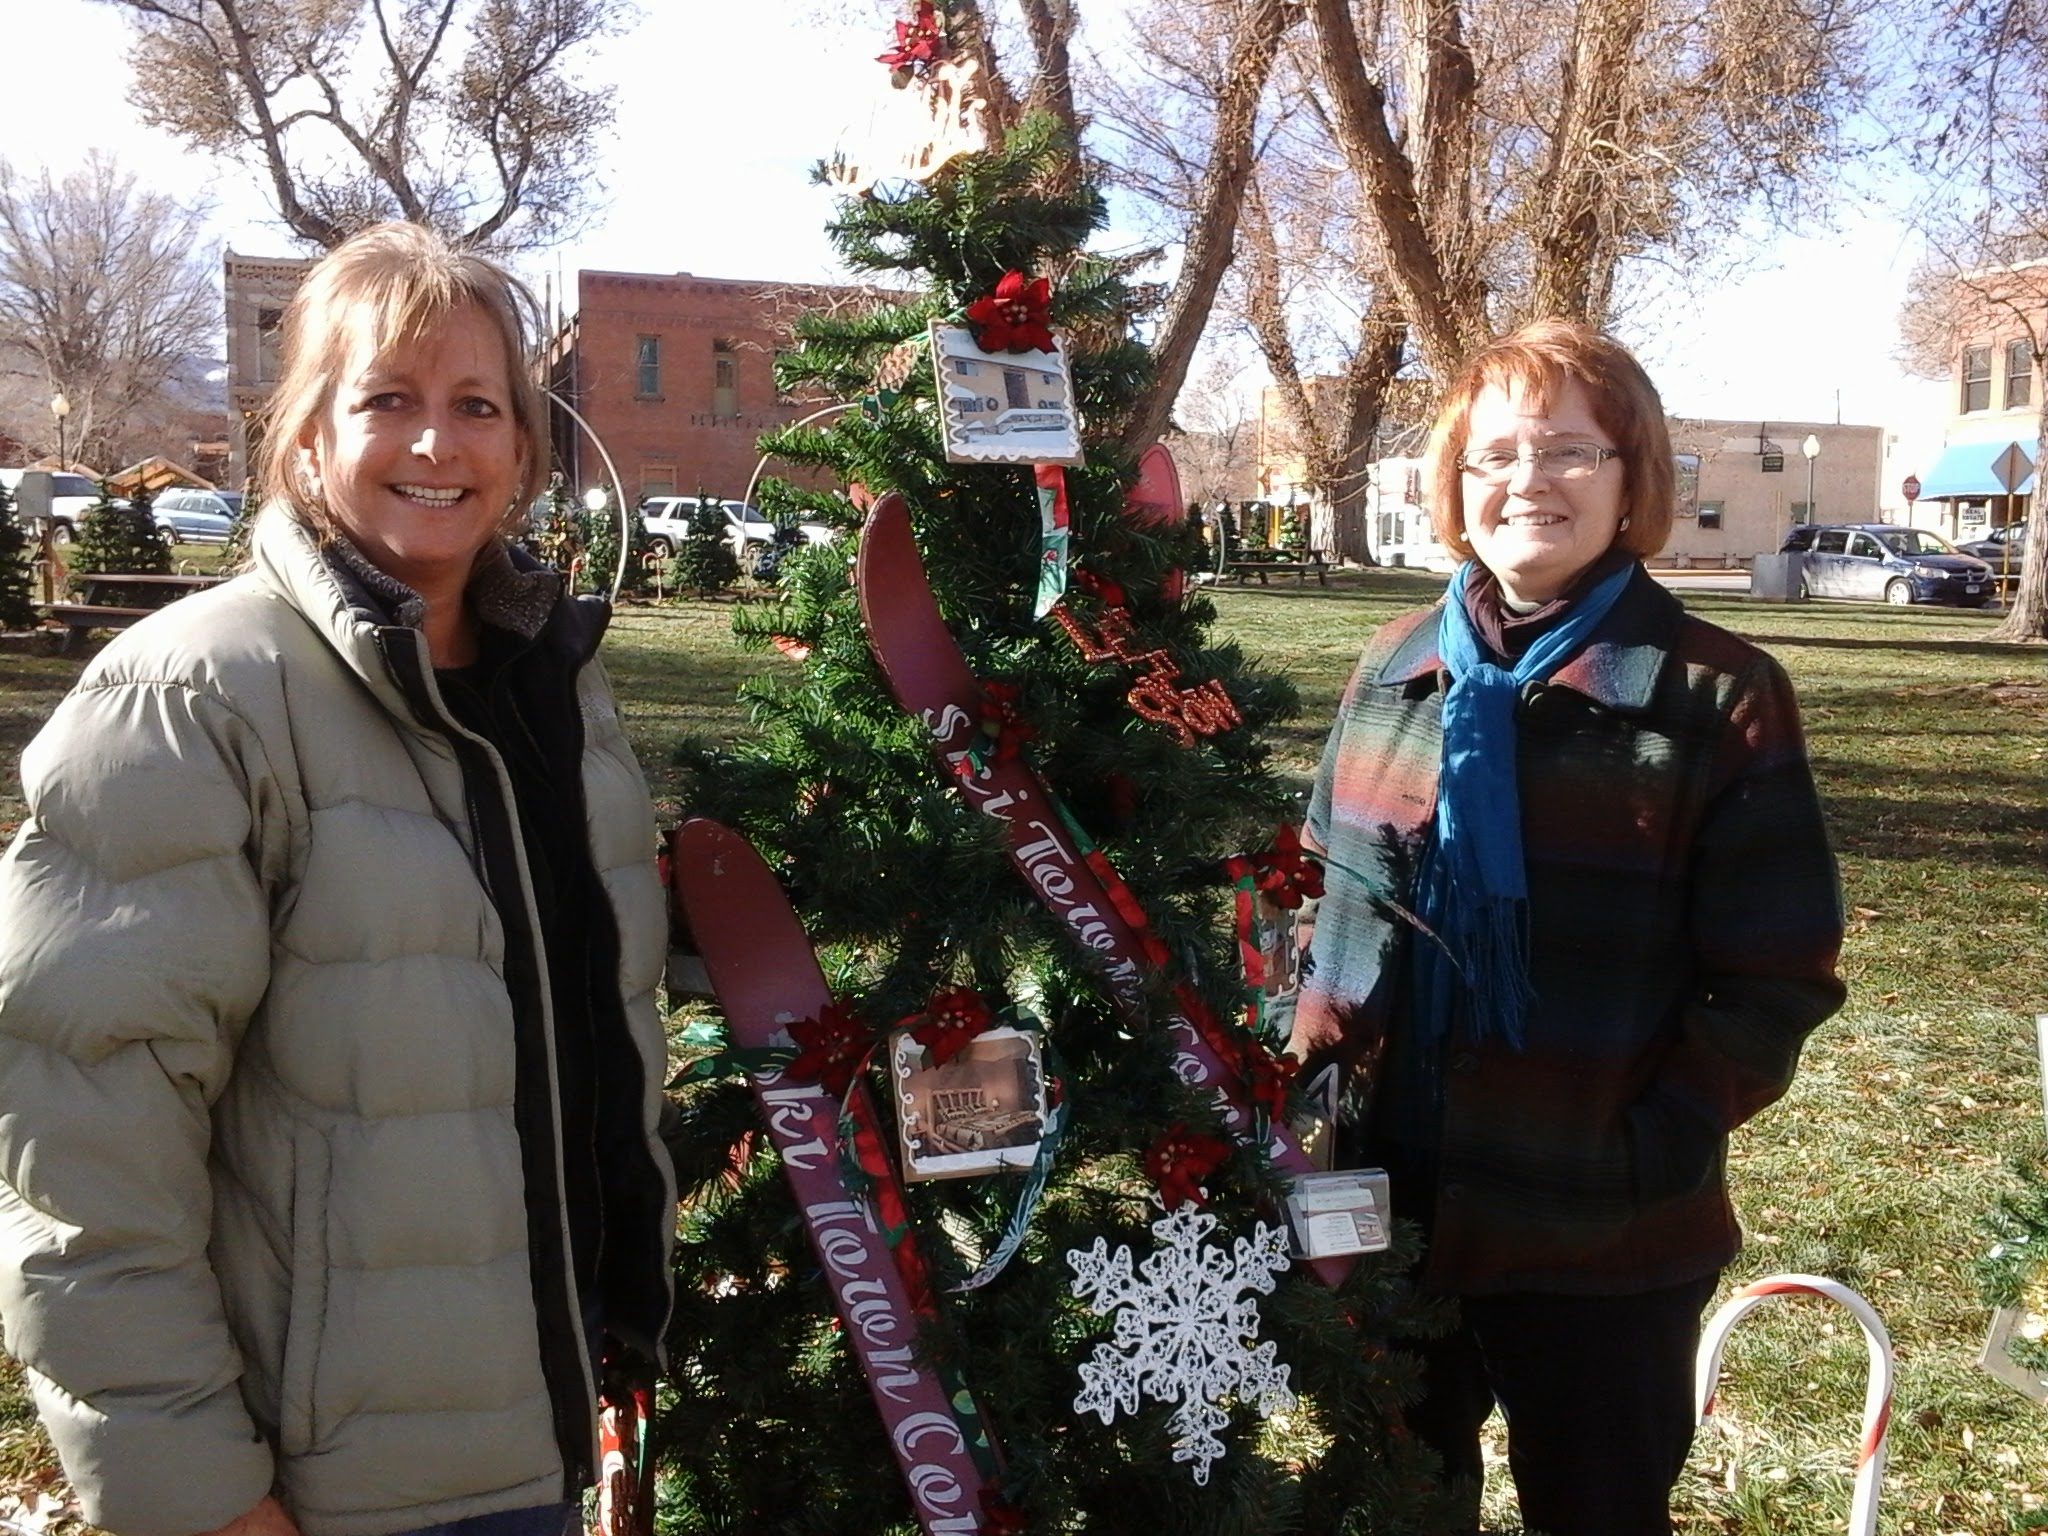 Exterior photo of a Christmas decorated with skis, two women smiling next to tree.